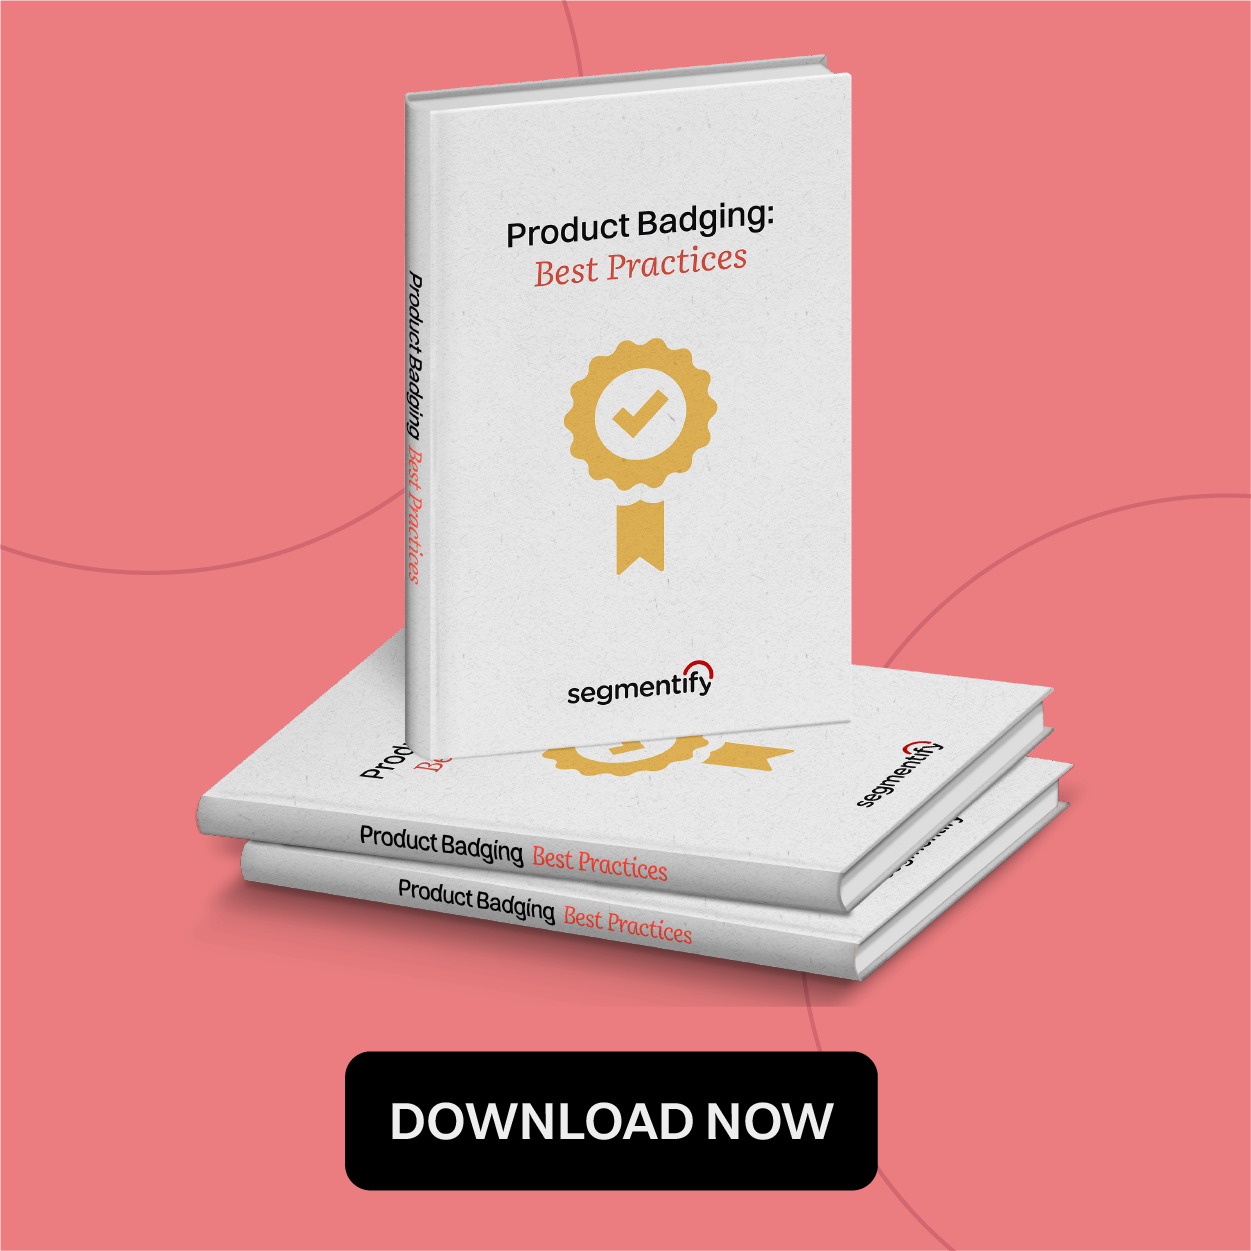 Download eCommerce Product Badging Best Practices